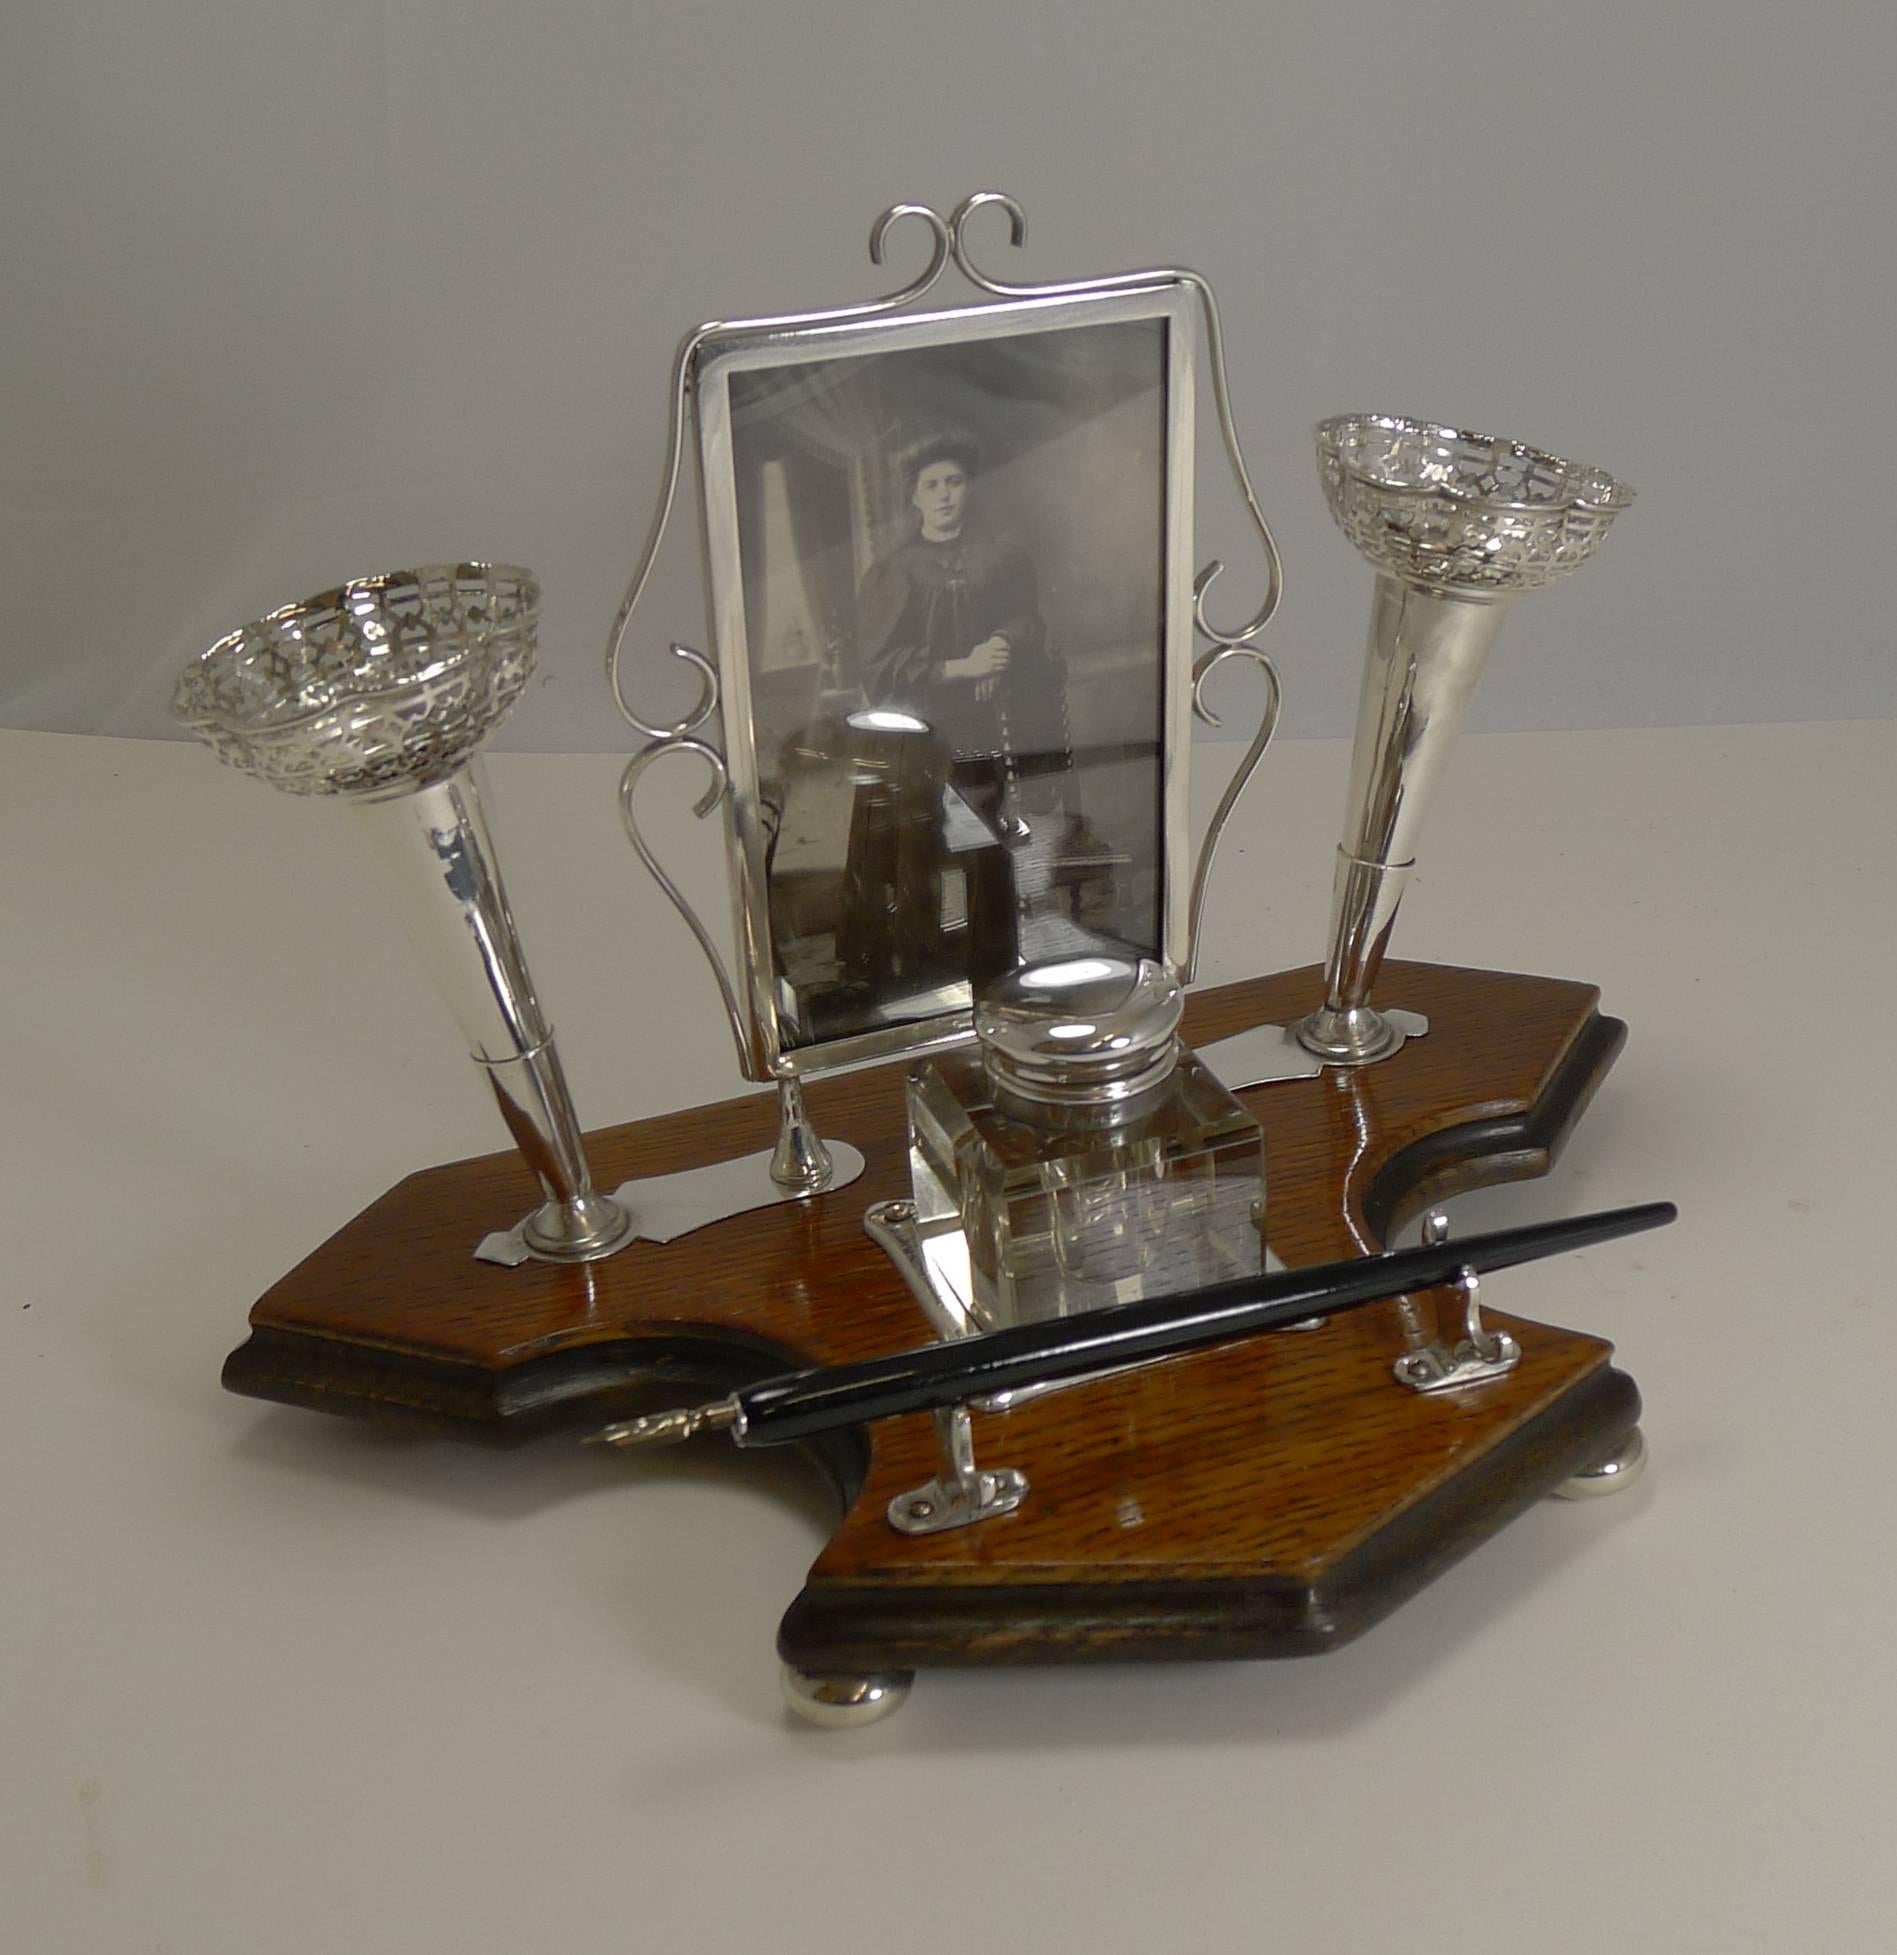 A truly unusual desk set made from a winning combination of solid English oak contrasted with the bright silver plated fittings.

Standing on four original bun feet, the base is made from oak with an ebonized edge.

Of course what makes this an